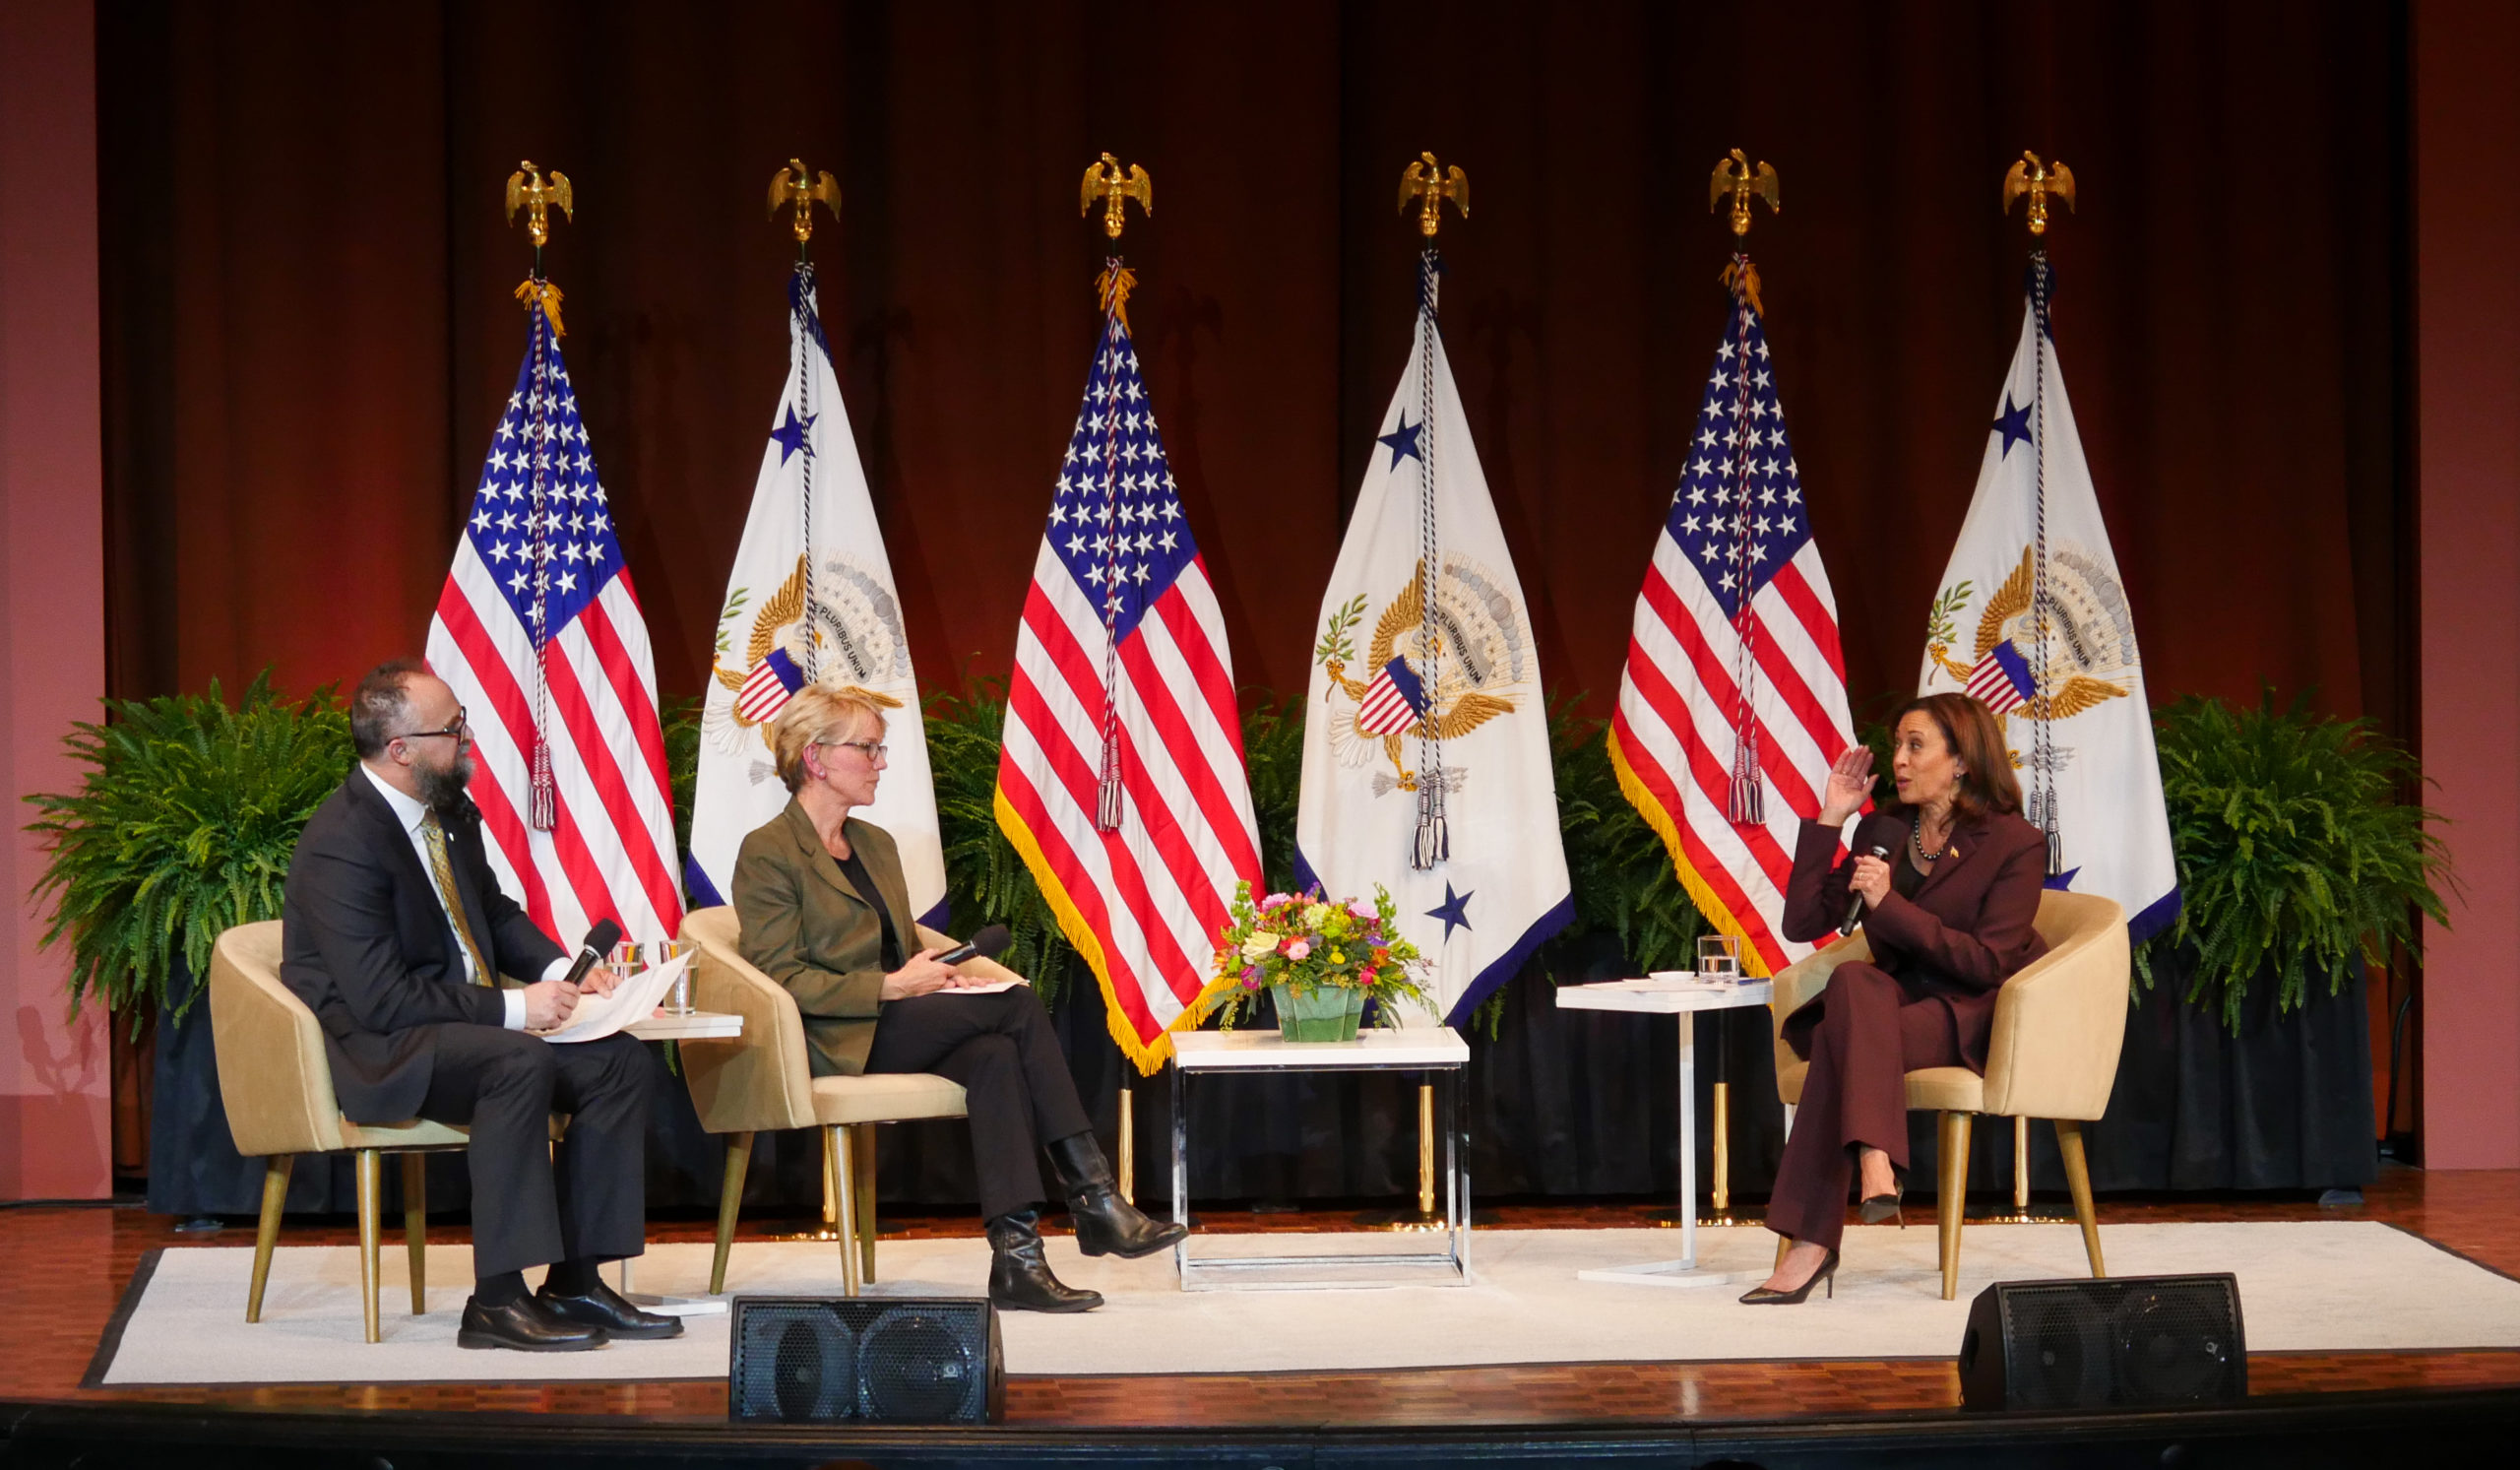 (From left to right) U-M professor Kyle Wright and Secretary of US Department of Energy Jennifer Granholm moderate a conversation with Vice President Kamala Harris. The stage is set with flags behind the speakers.